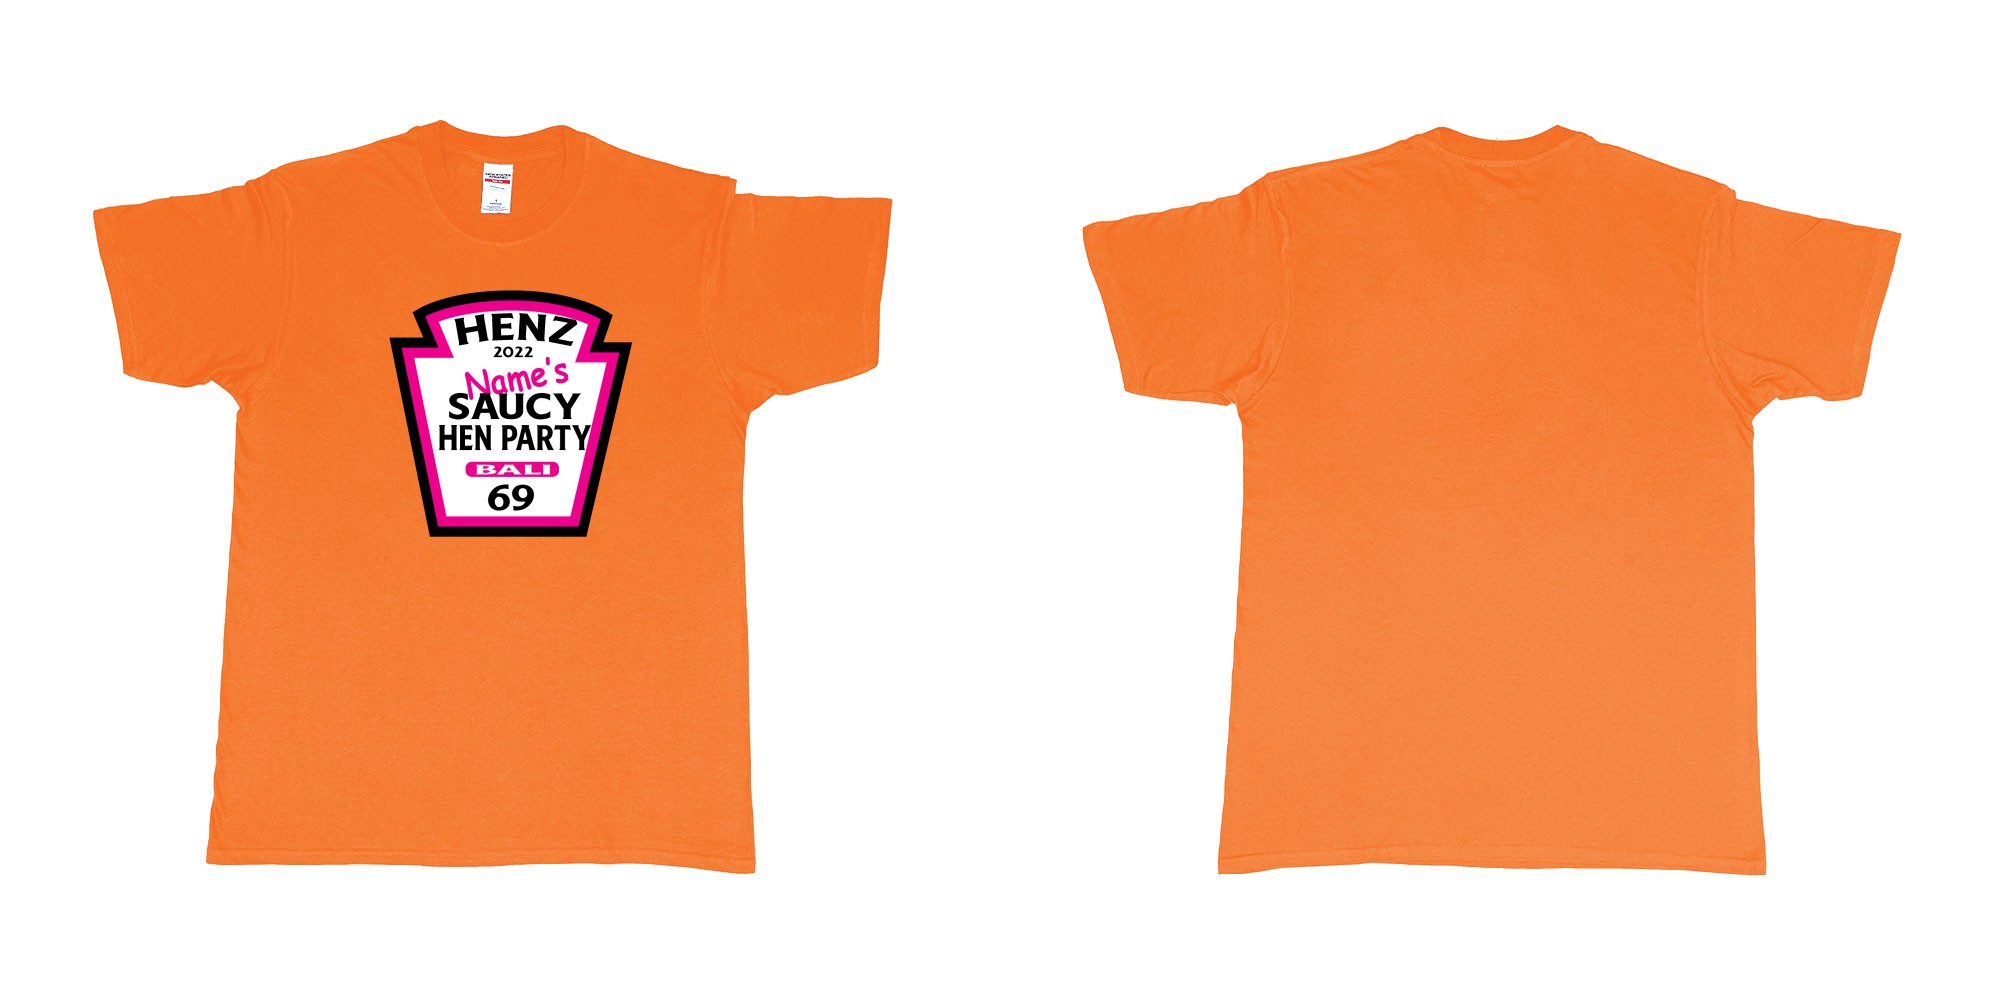 Custom tshirt design TPW Heinz ketchup hen night in fabric color orange choice your own text made in Bali by The Pirate Way